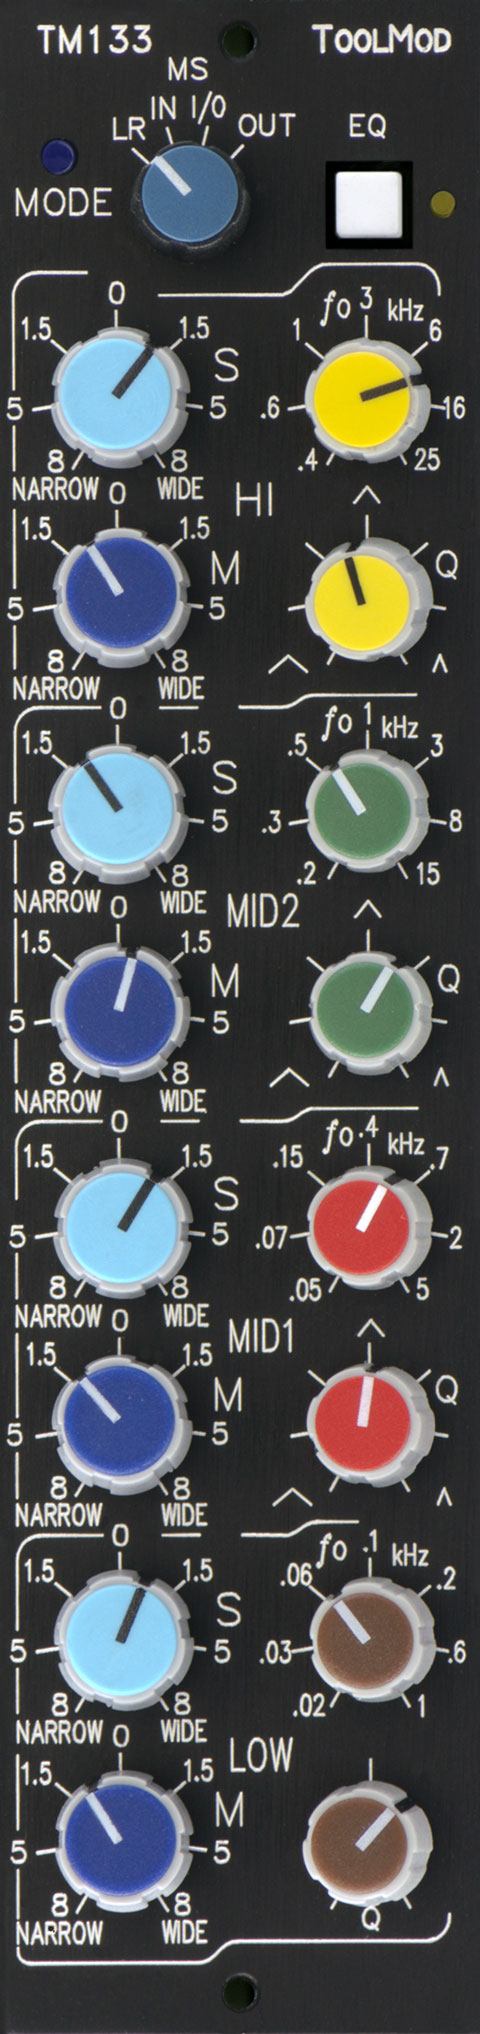 M/S Matrix with Direction Mixer and elliptic EQ, vertical Version